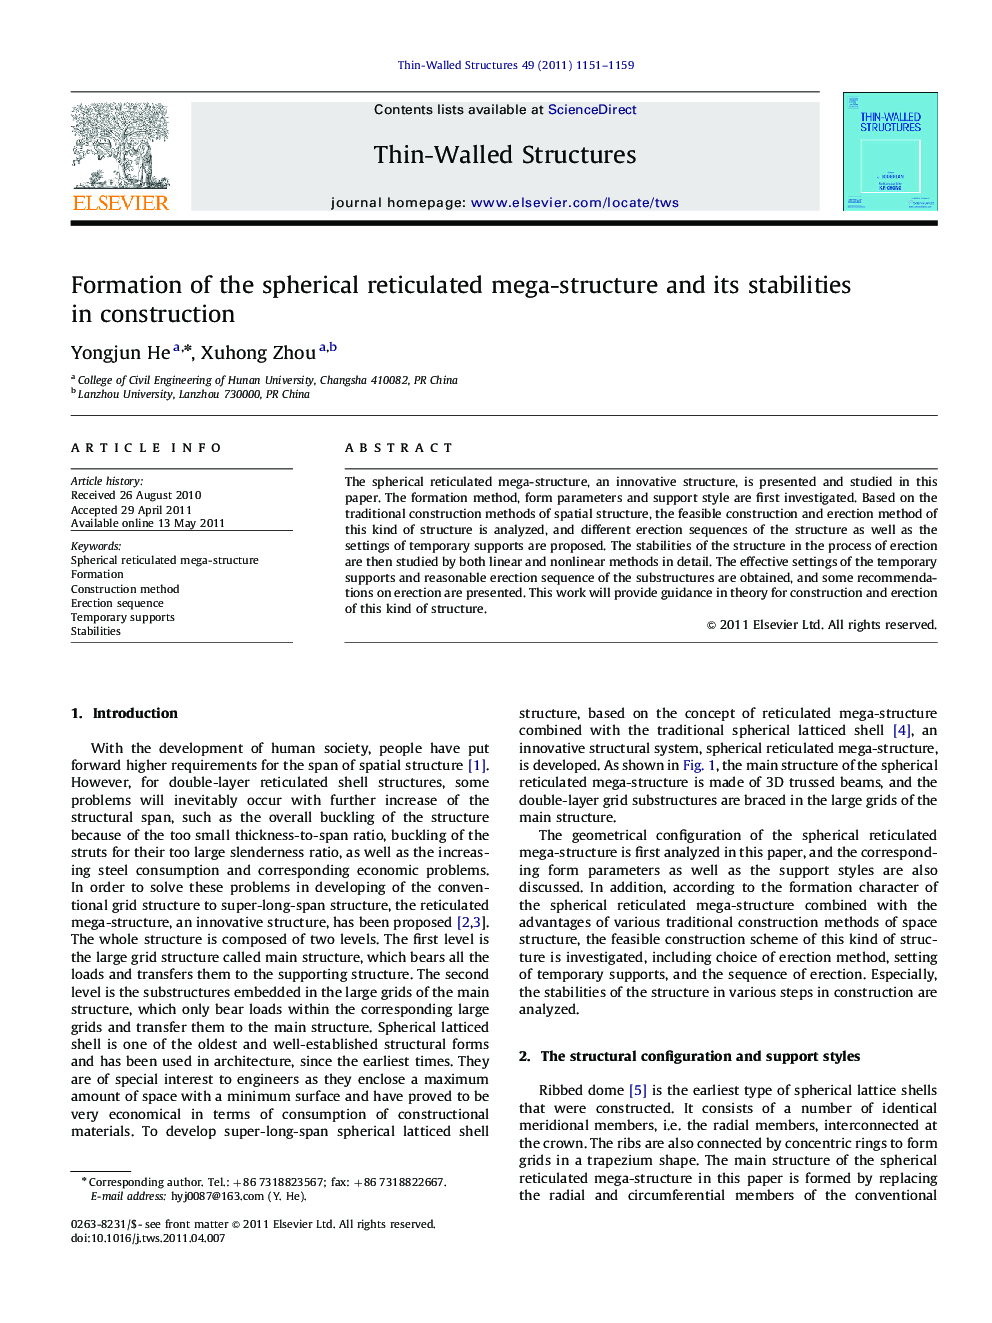 Formation of the spherical reticulated mega-structure and its stabilities in construction